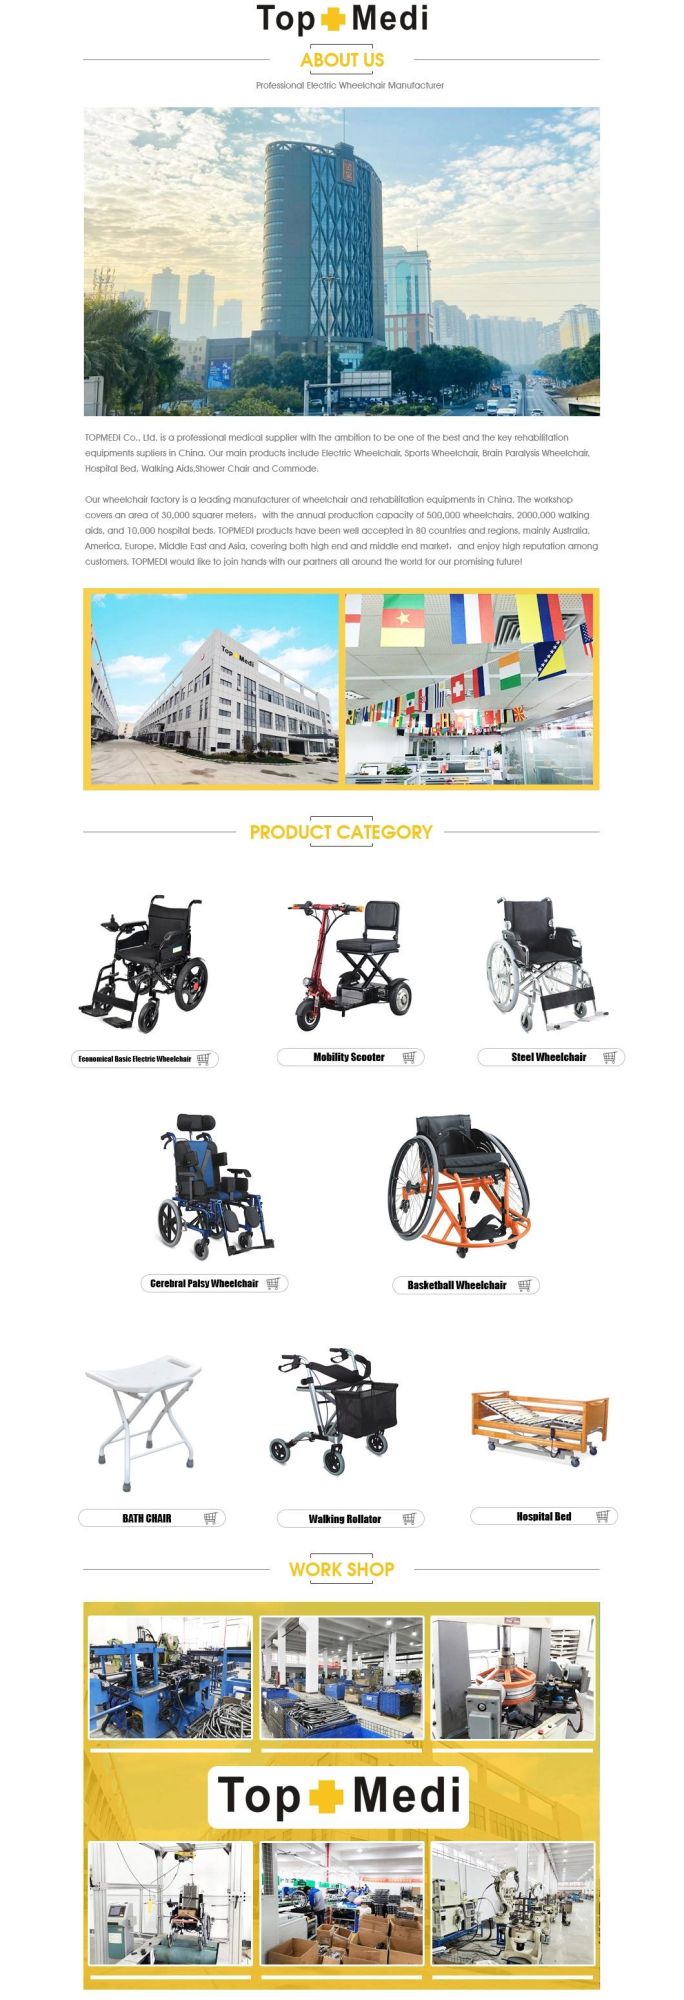 Hot CE Approved Folding Equipment Medical Products Standing Product Rollator Tmsw101